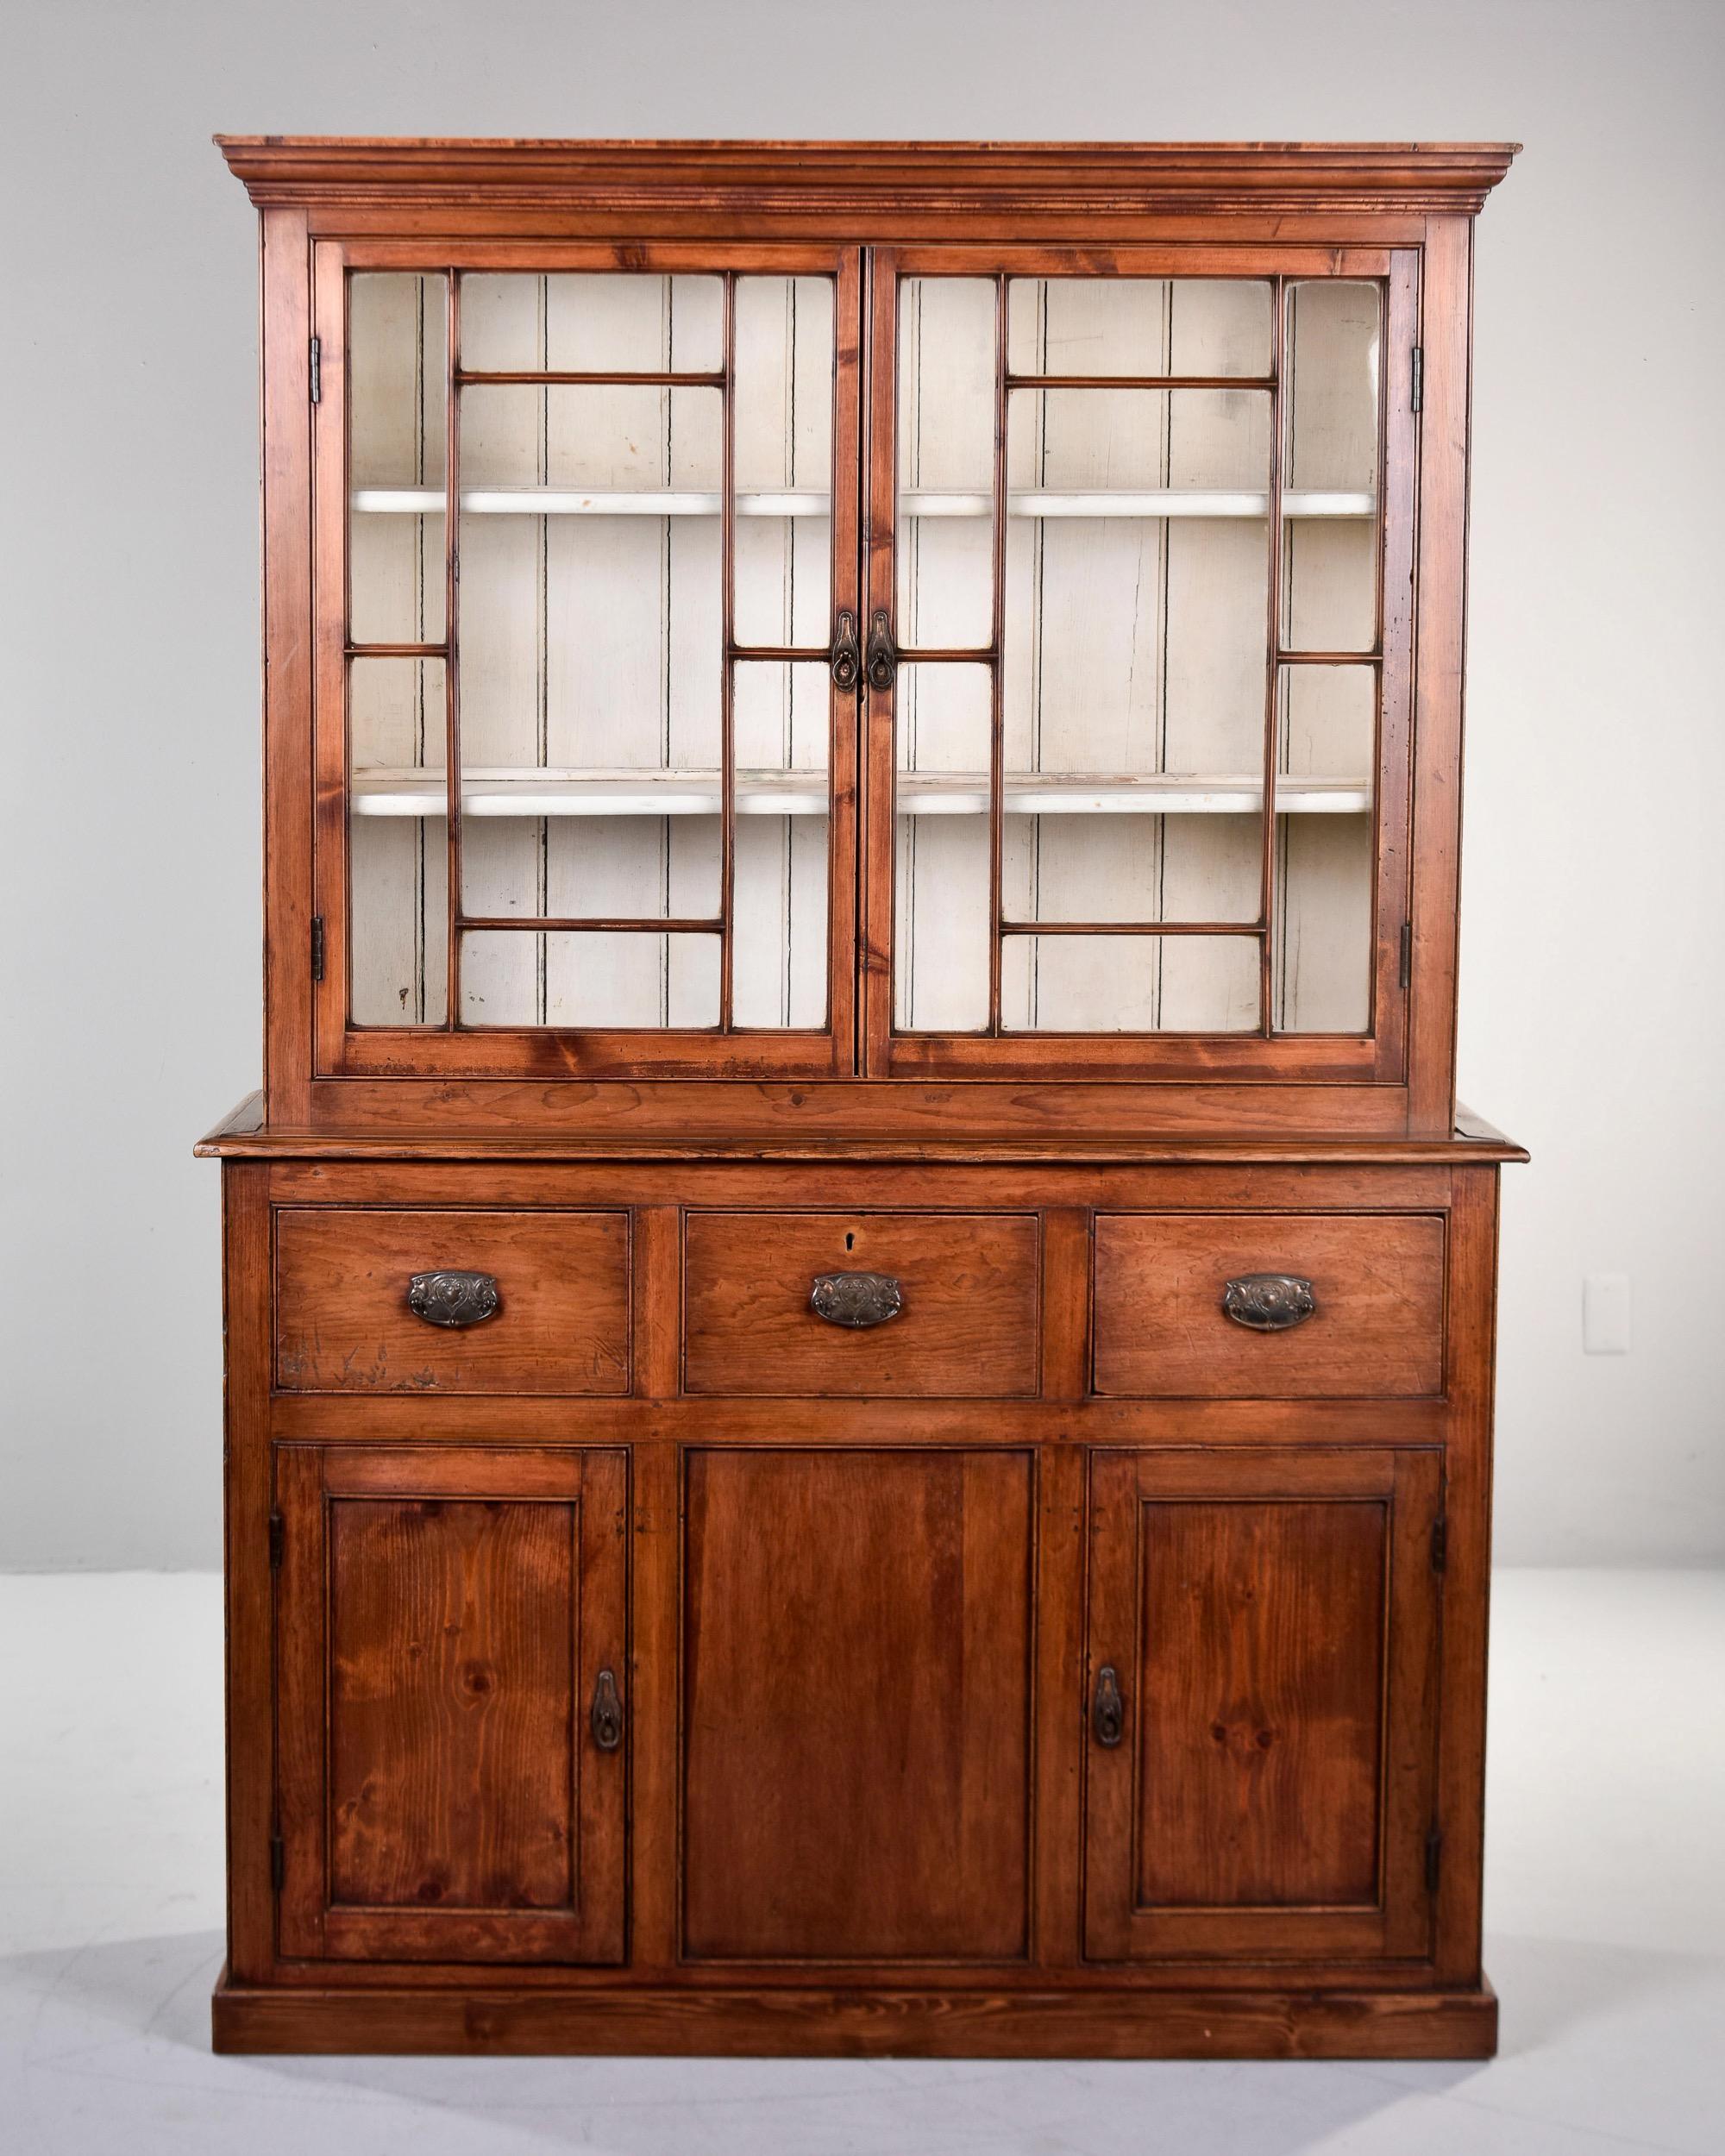 Tall 19th C English Pine Cupboard With Glazed Top In Good Condition For Sale In Troy, MI